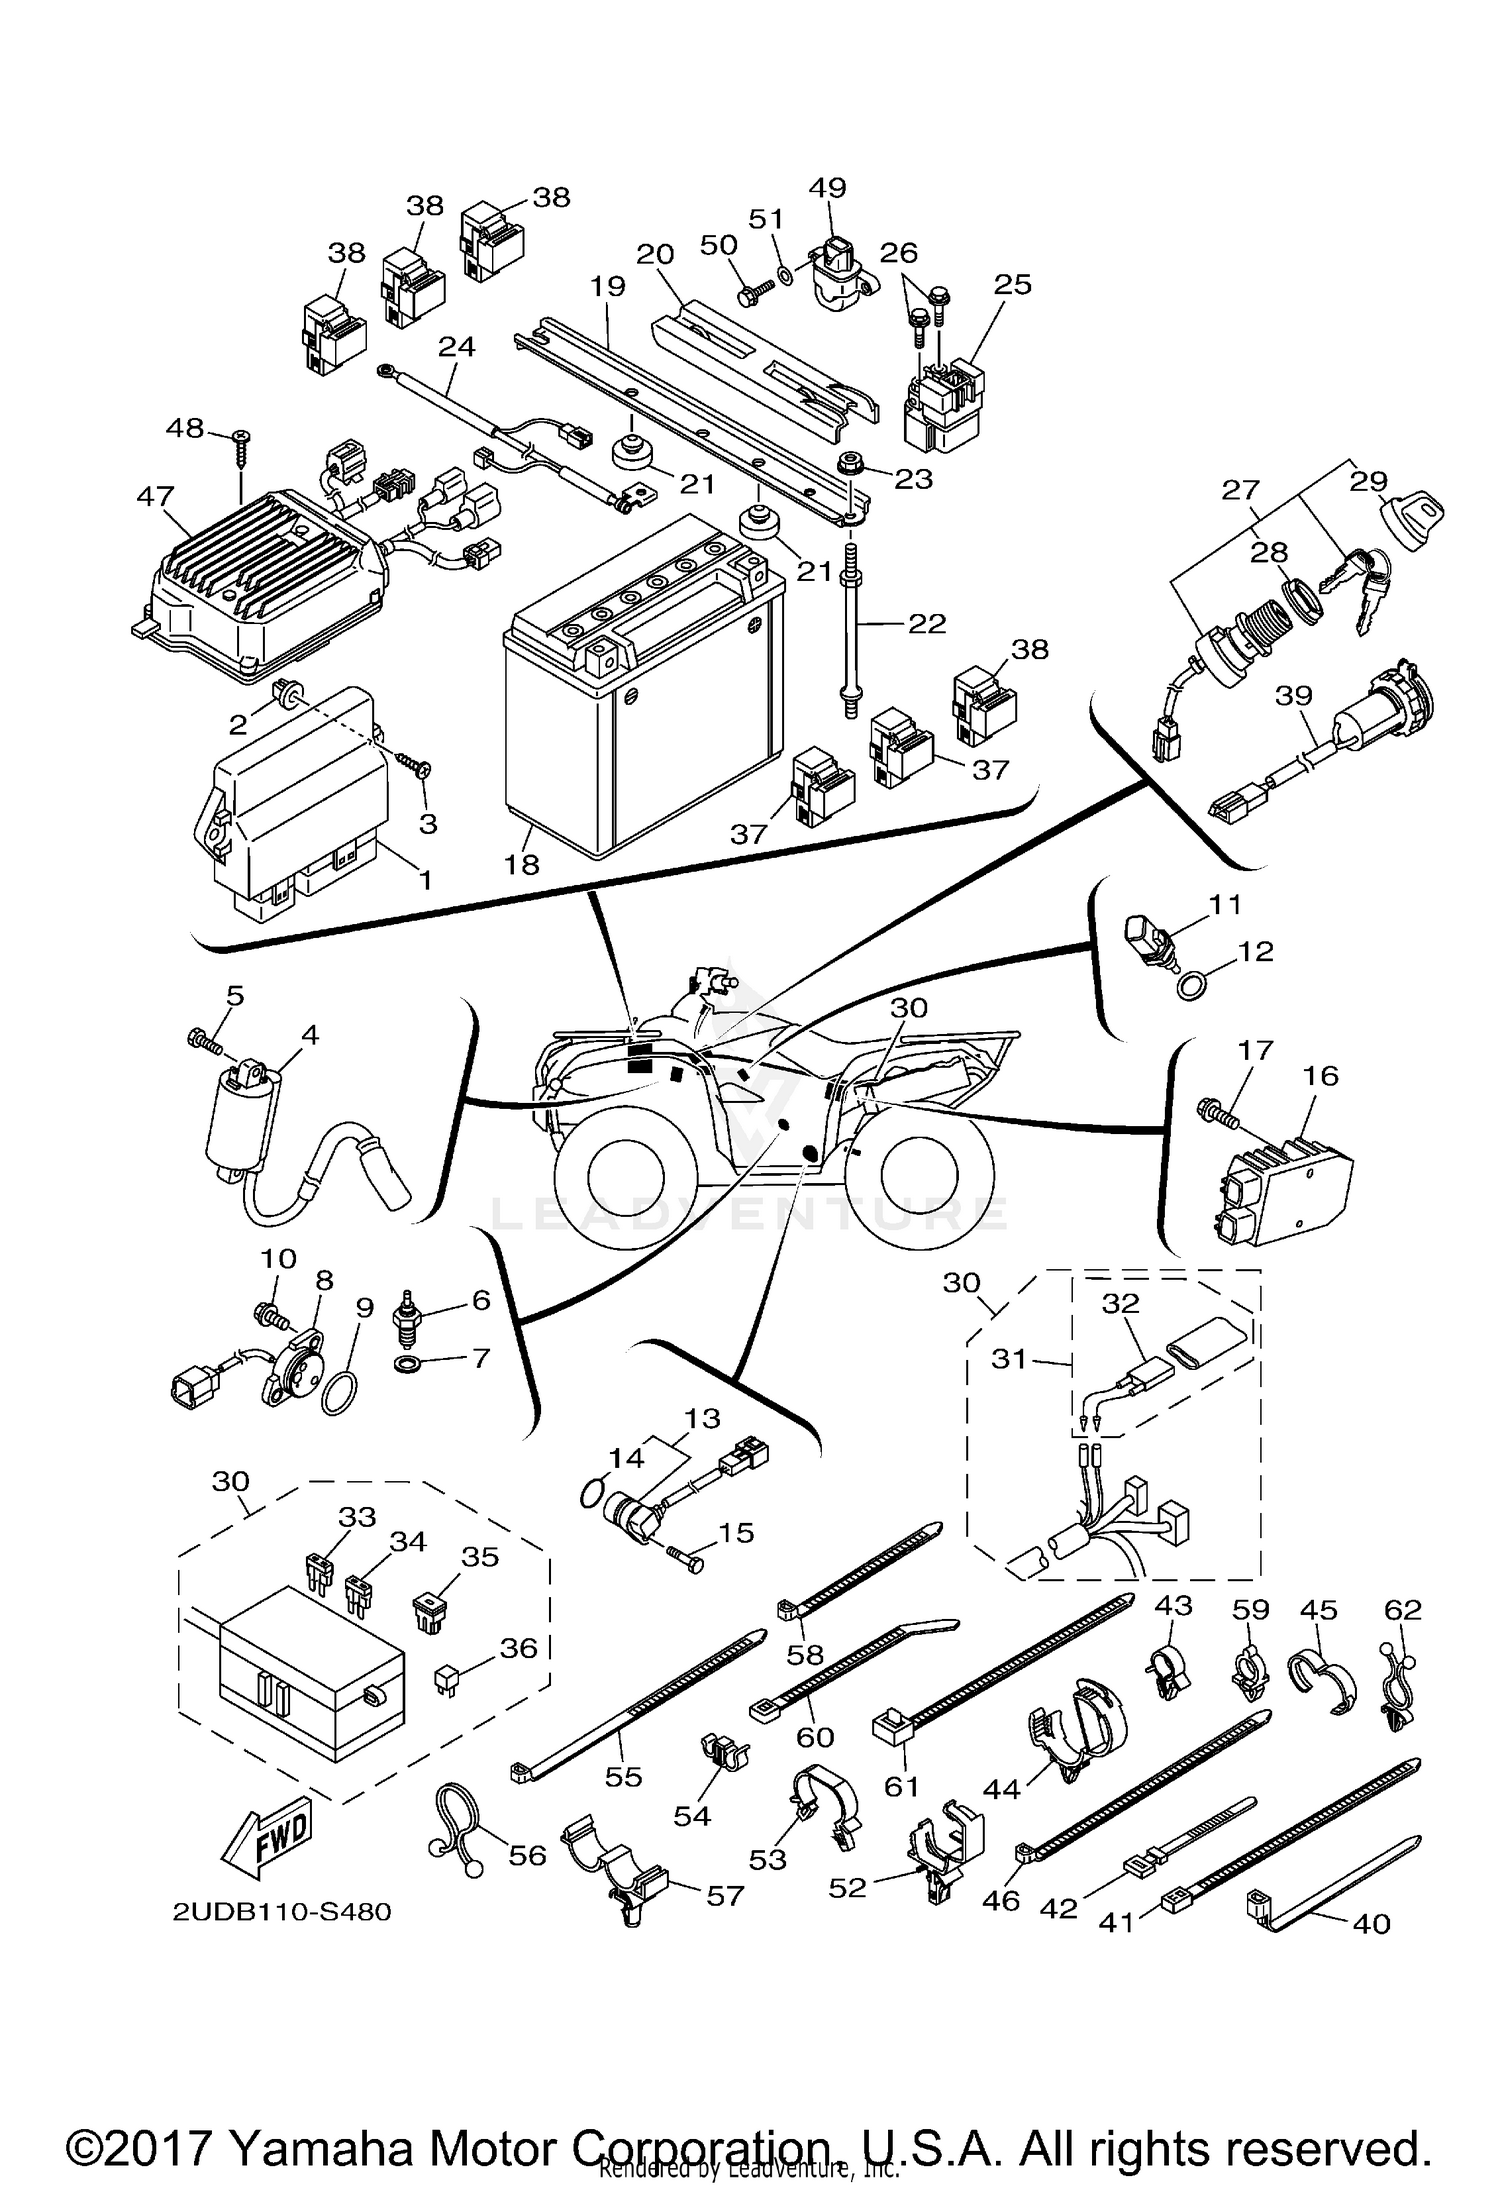 2007 Yamaha Grizzly 700 Wiring Diagram